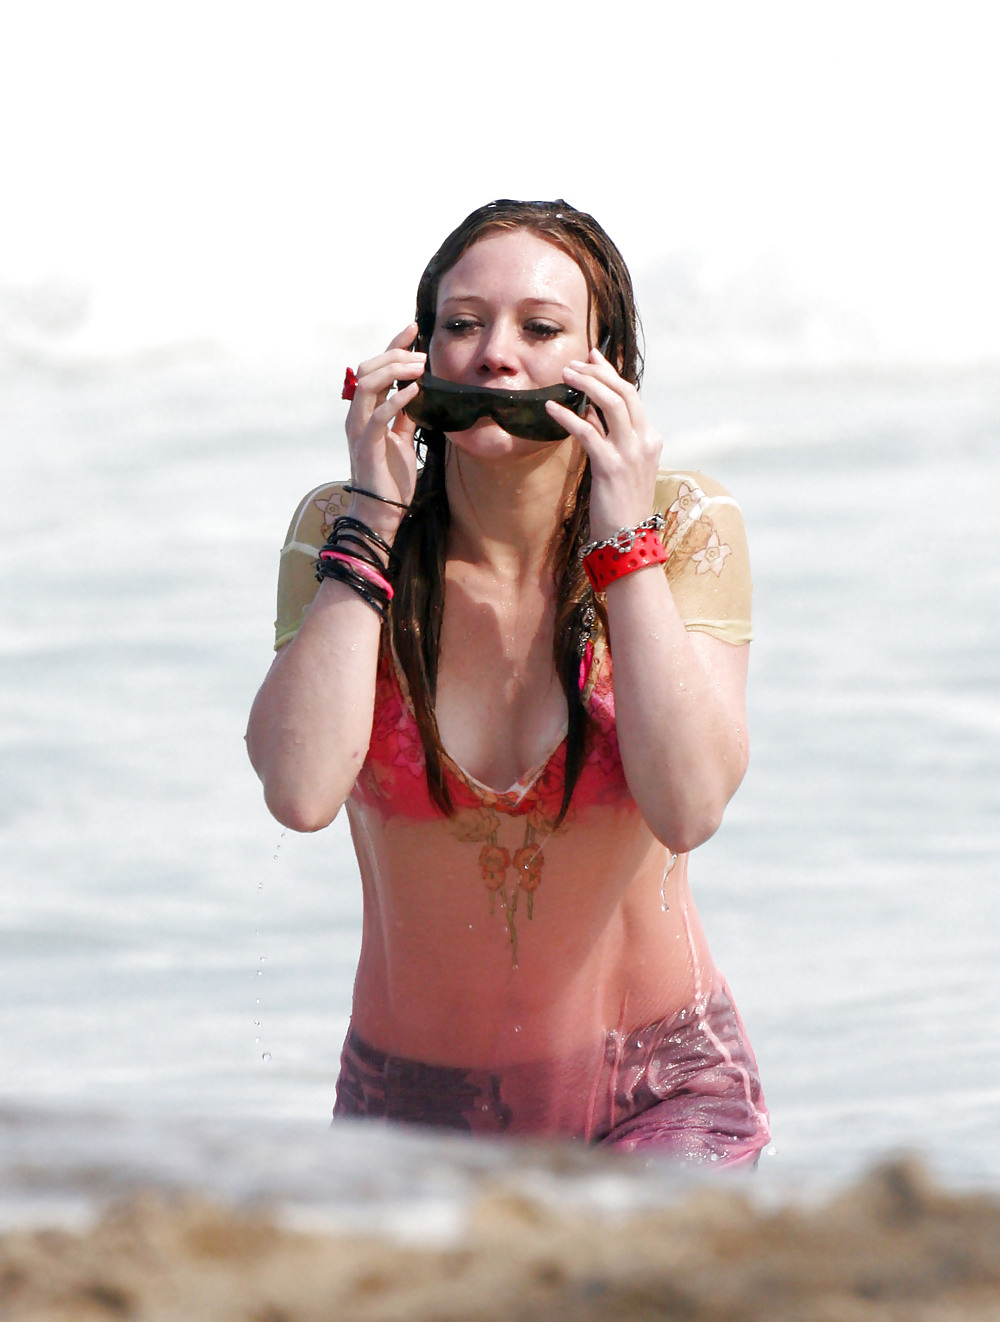 Hilary Duff at the Beach playing around in a wet shirt #7220971